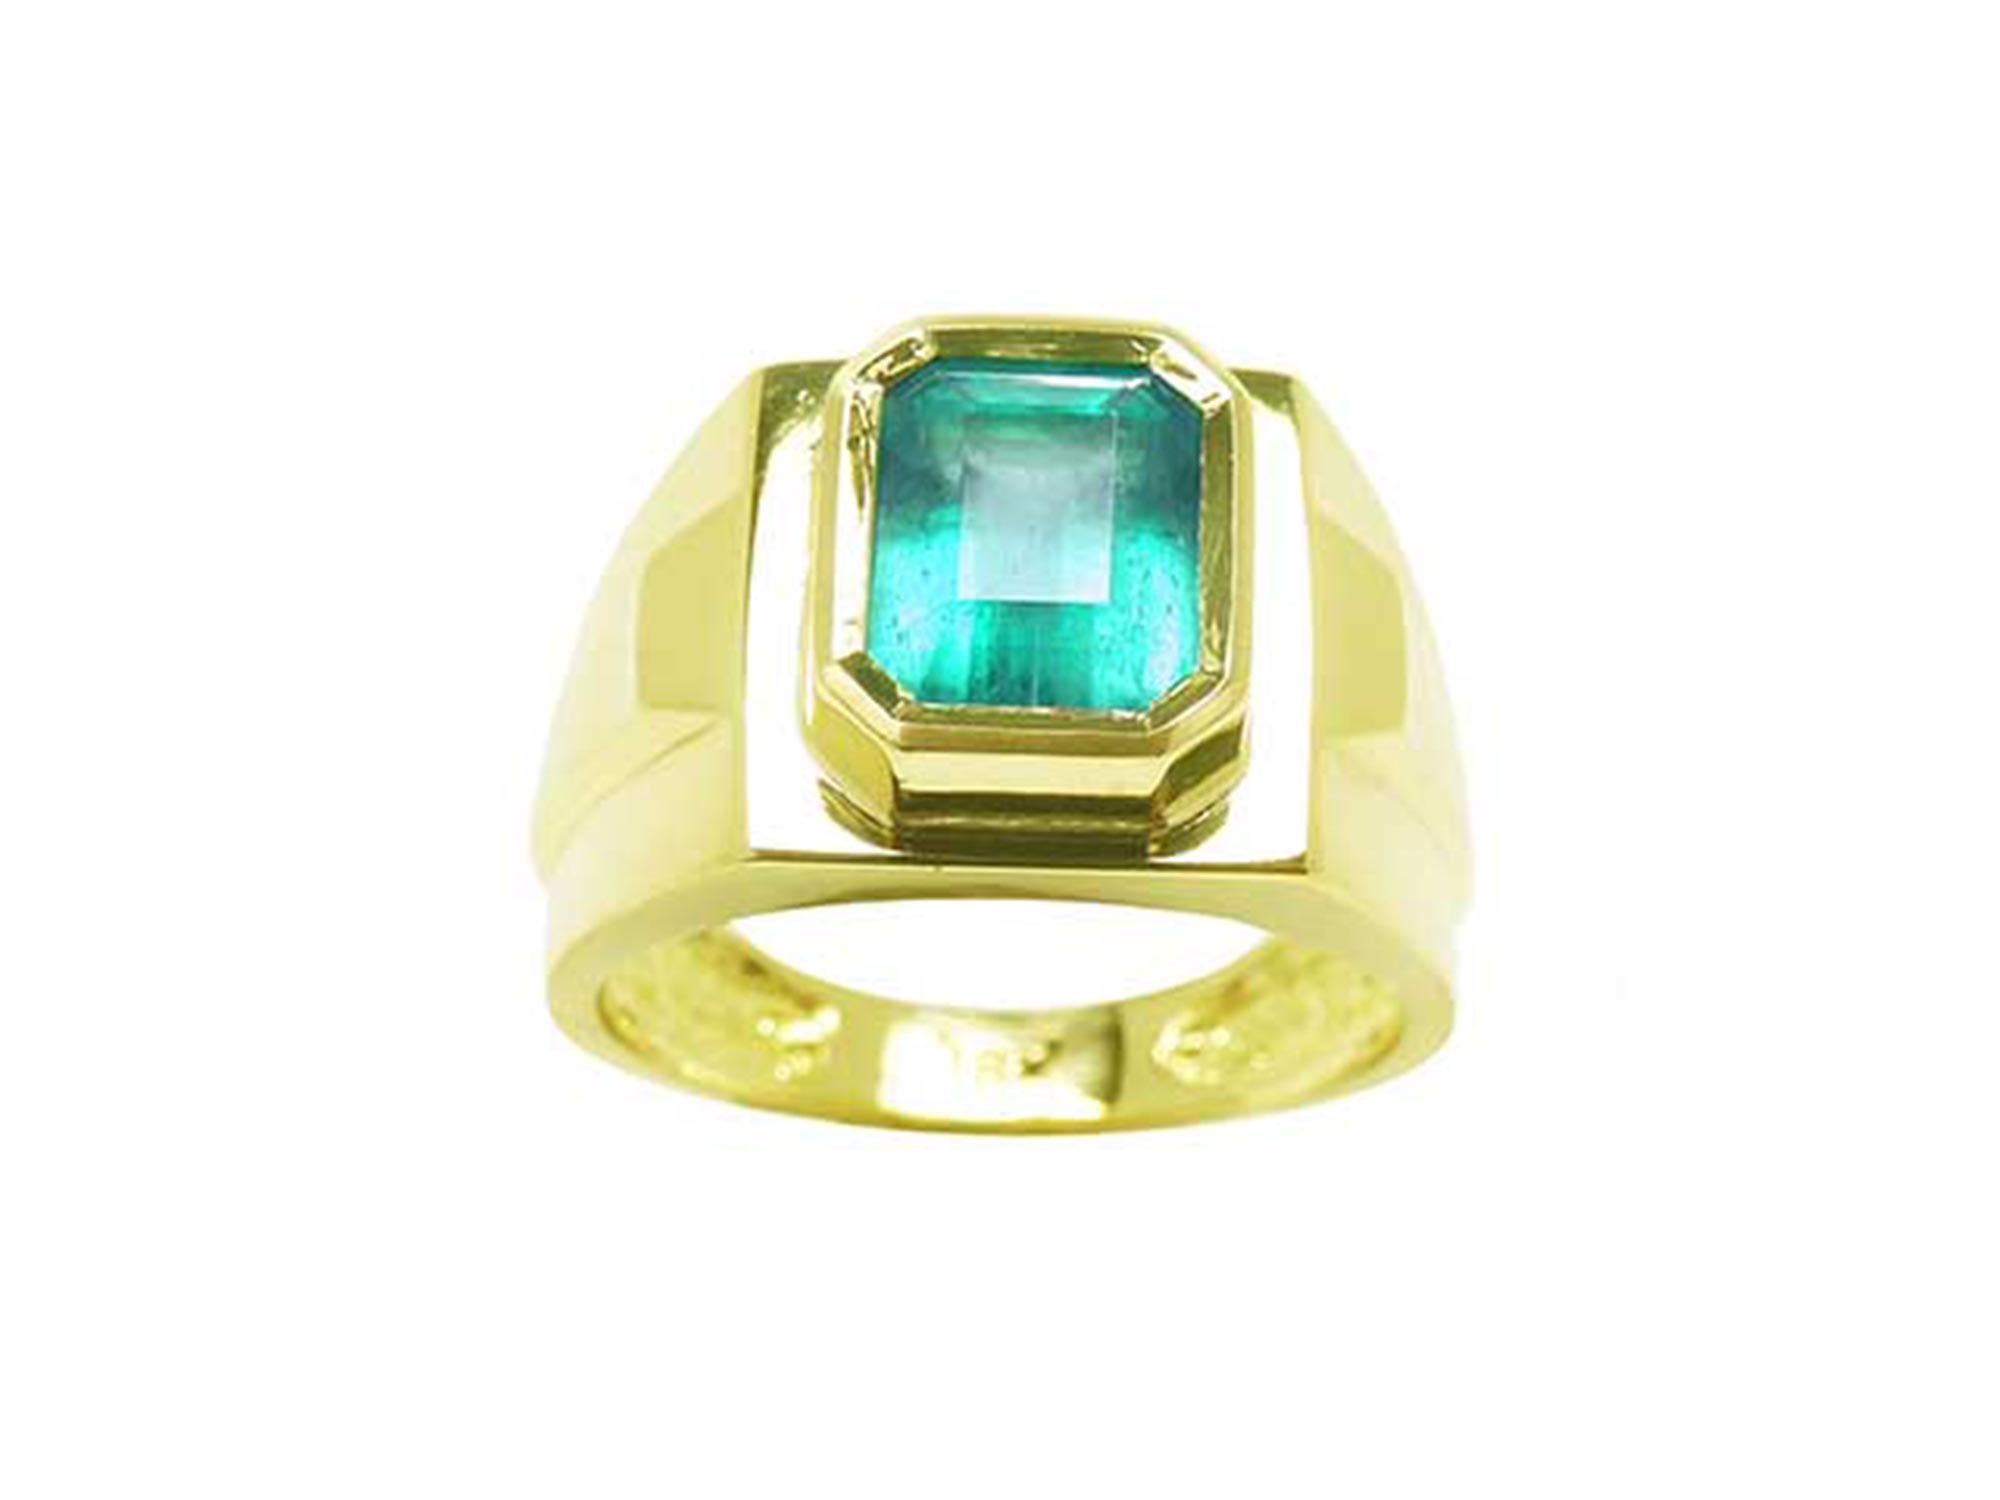 Real Colombian emerald rings for man